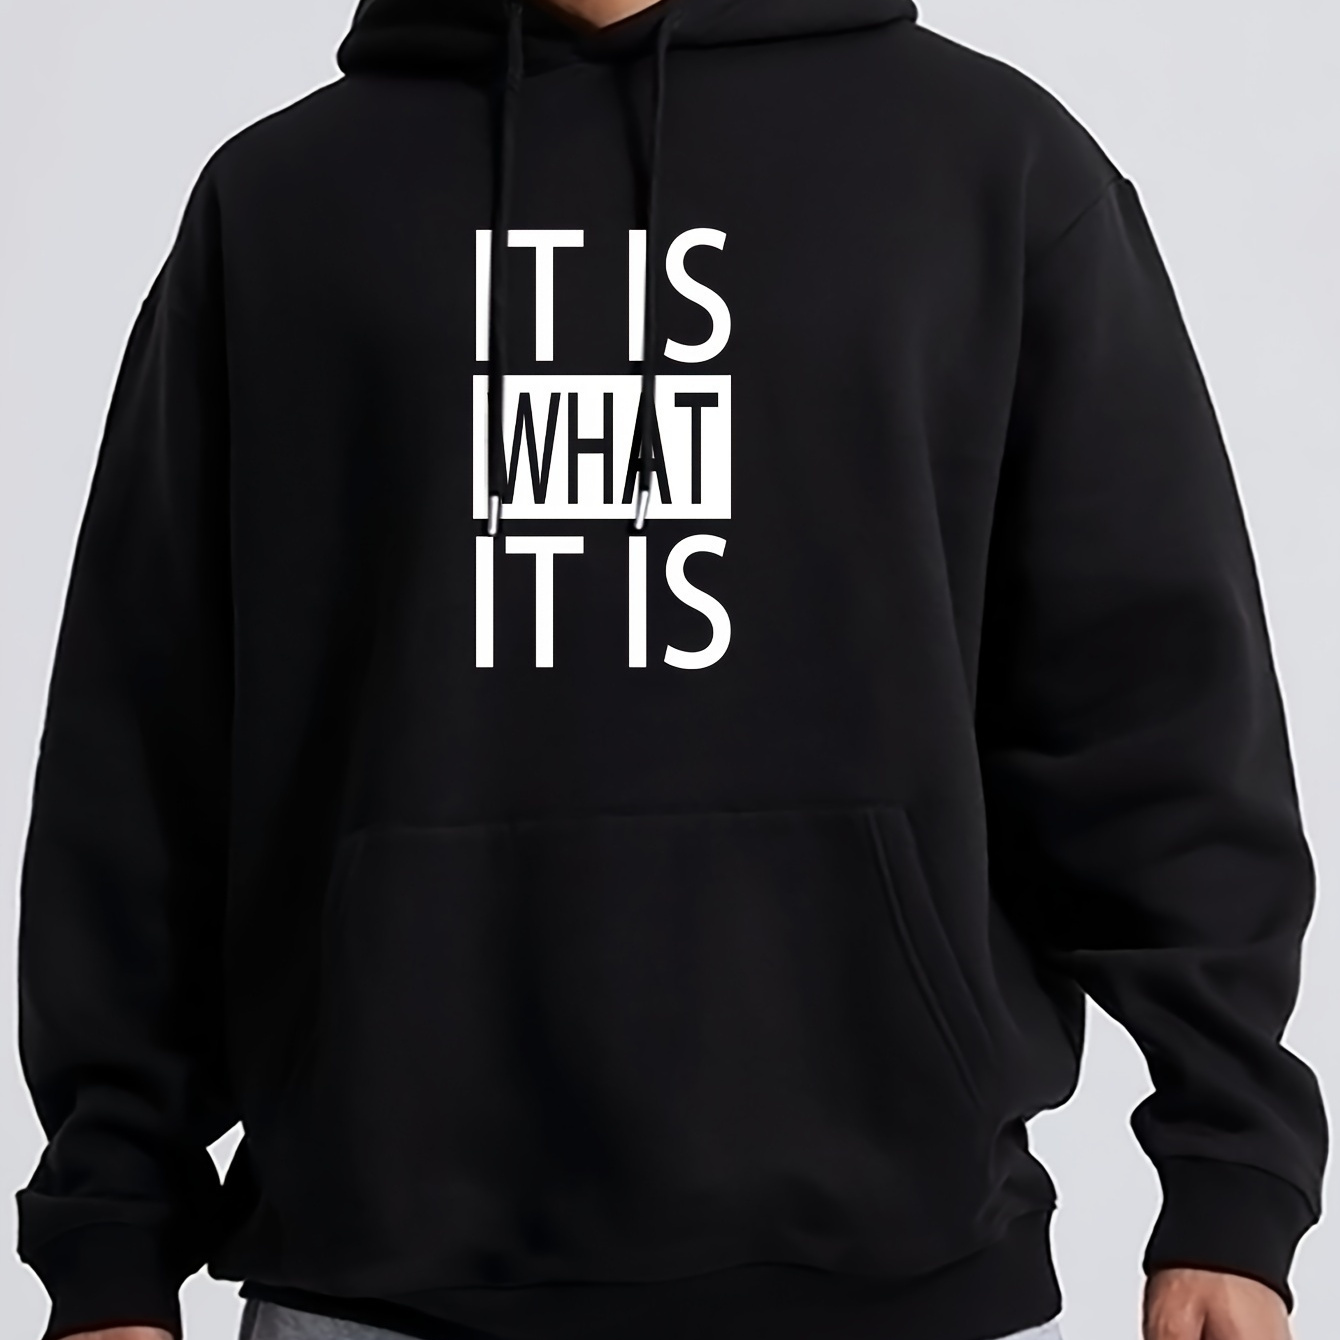 

It Is What It Is Print Men's Pullover Round Neck Hoodies With Kangaroo Pocket Long Sleeve Hooded Sweatshirt Loose Casual Top For Autumn Winter Men's Clothing As Gifts